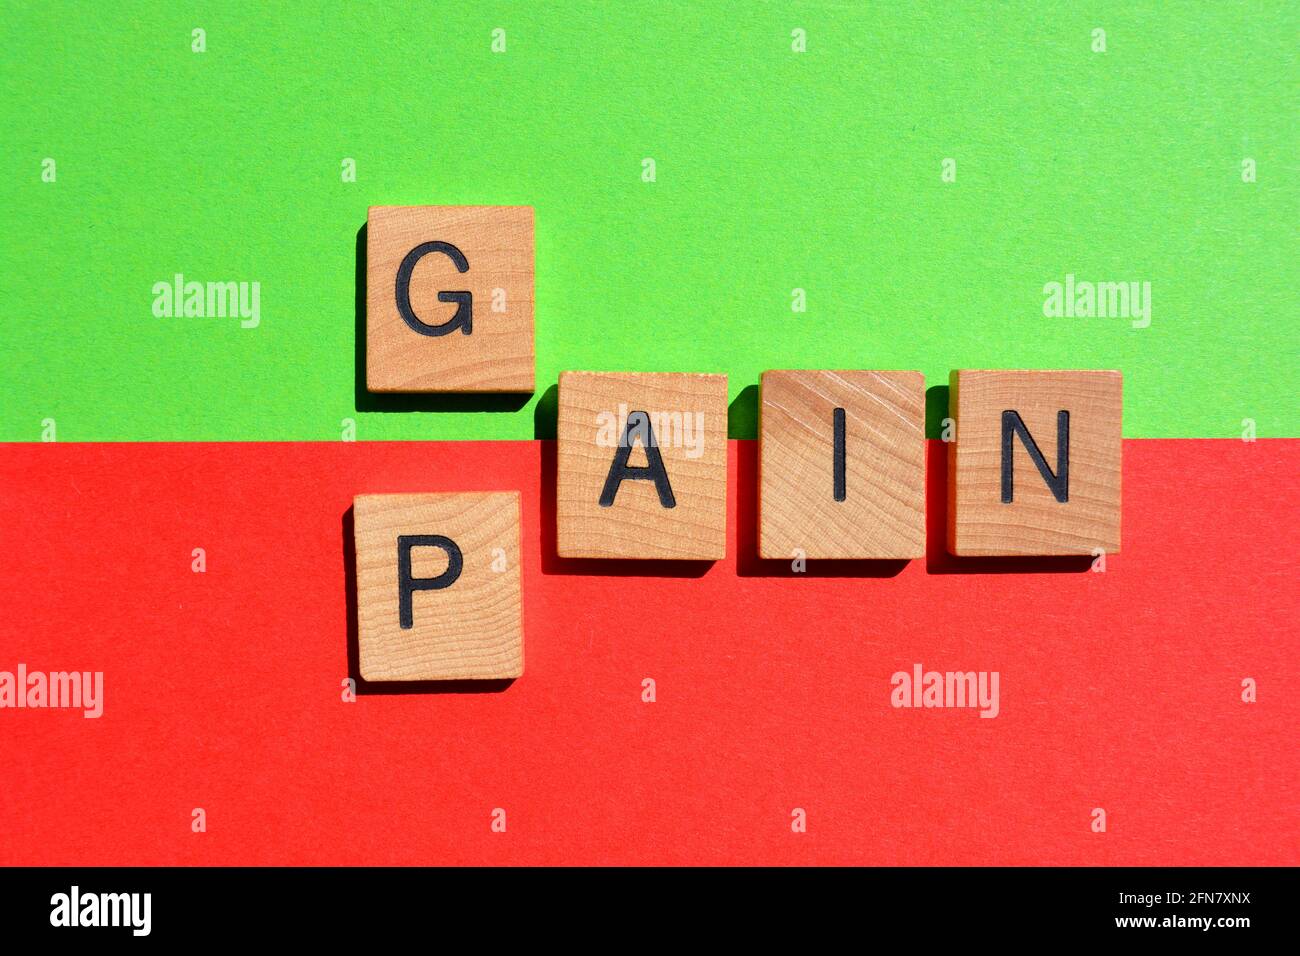 Gain, Pain, words in wooden alphabet letters isolated on green and red background Stock Photo